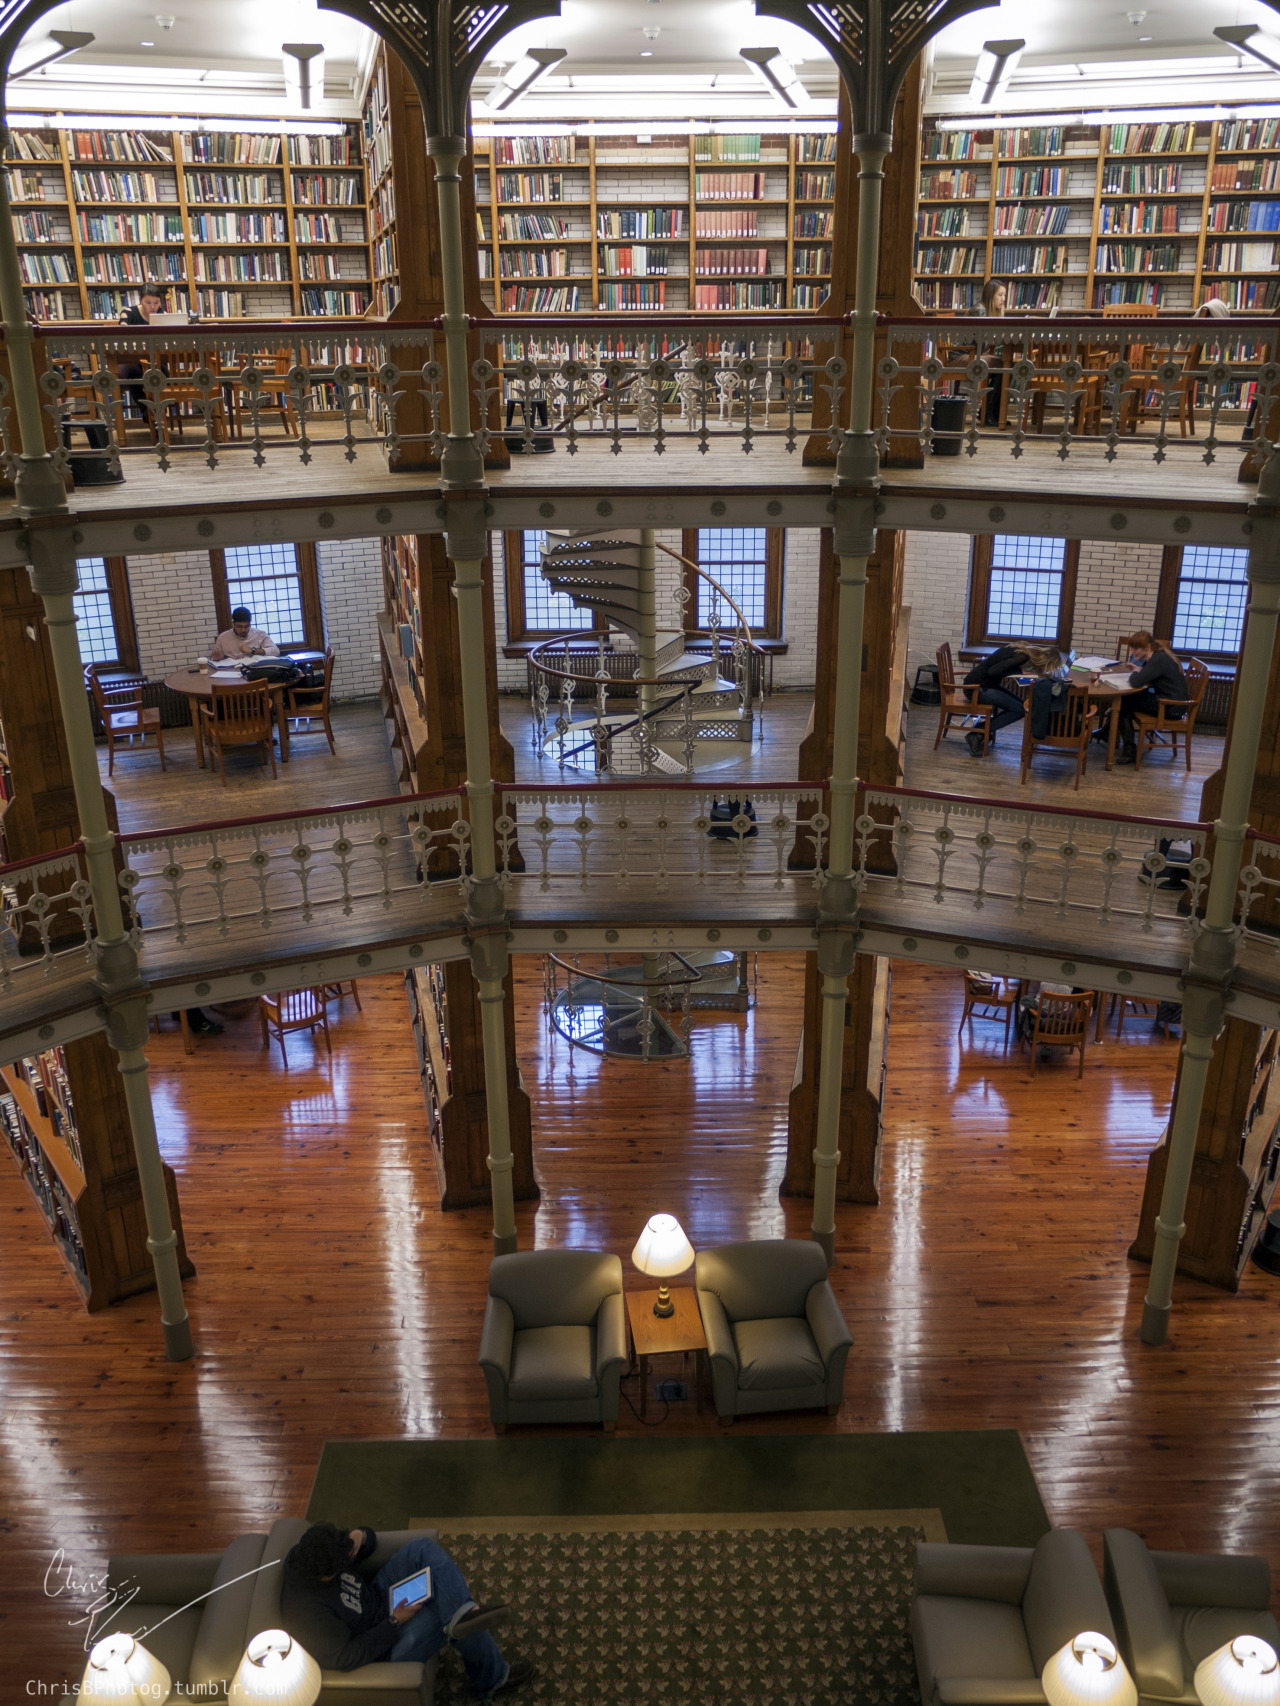 Inside Linderman Library
(Its finals time)